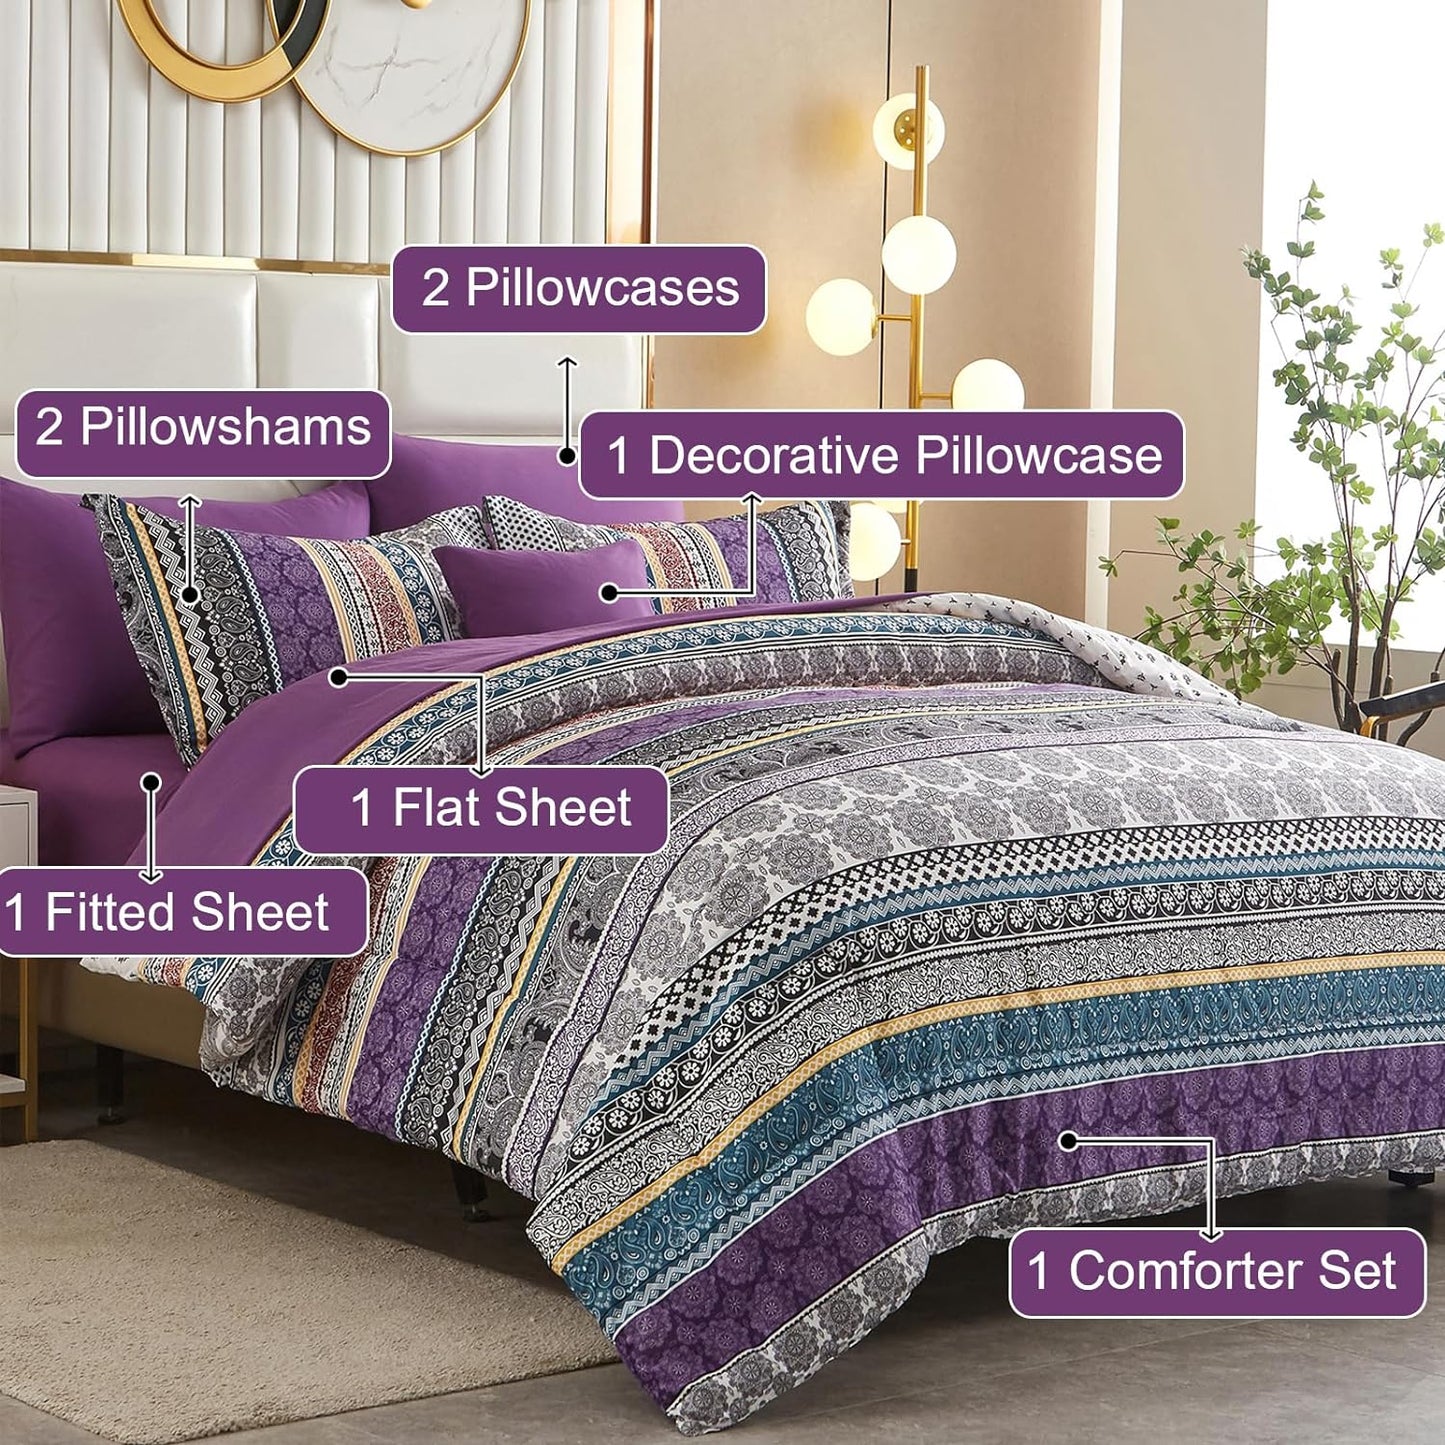 Boho Comforter Set Queen Size,8 Piece Bed in a Bag Bohemian Striped Bedding Quilt Set,Purple Paisley Floral Comforter and Sheet Set,Soft Microfiber Complete Bedding Sets for All Season